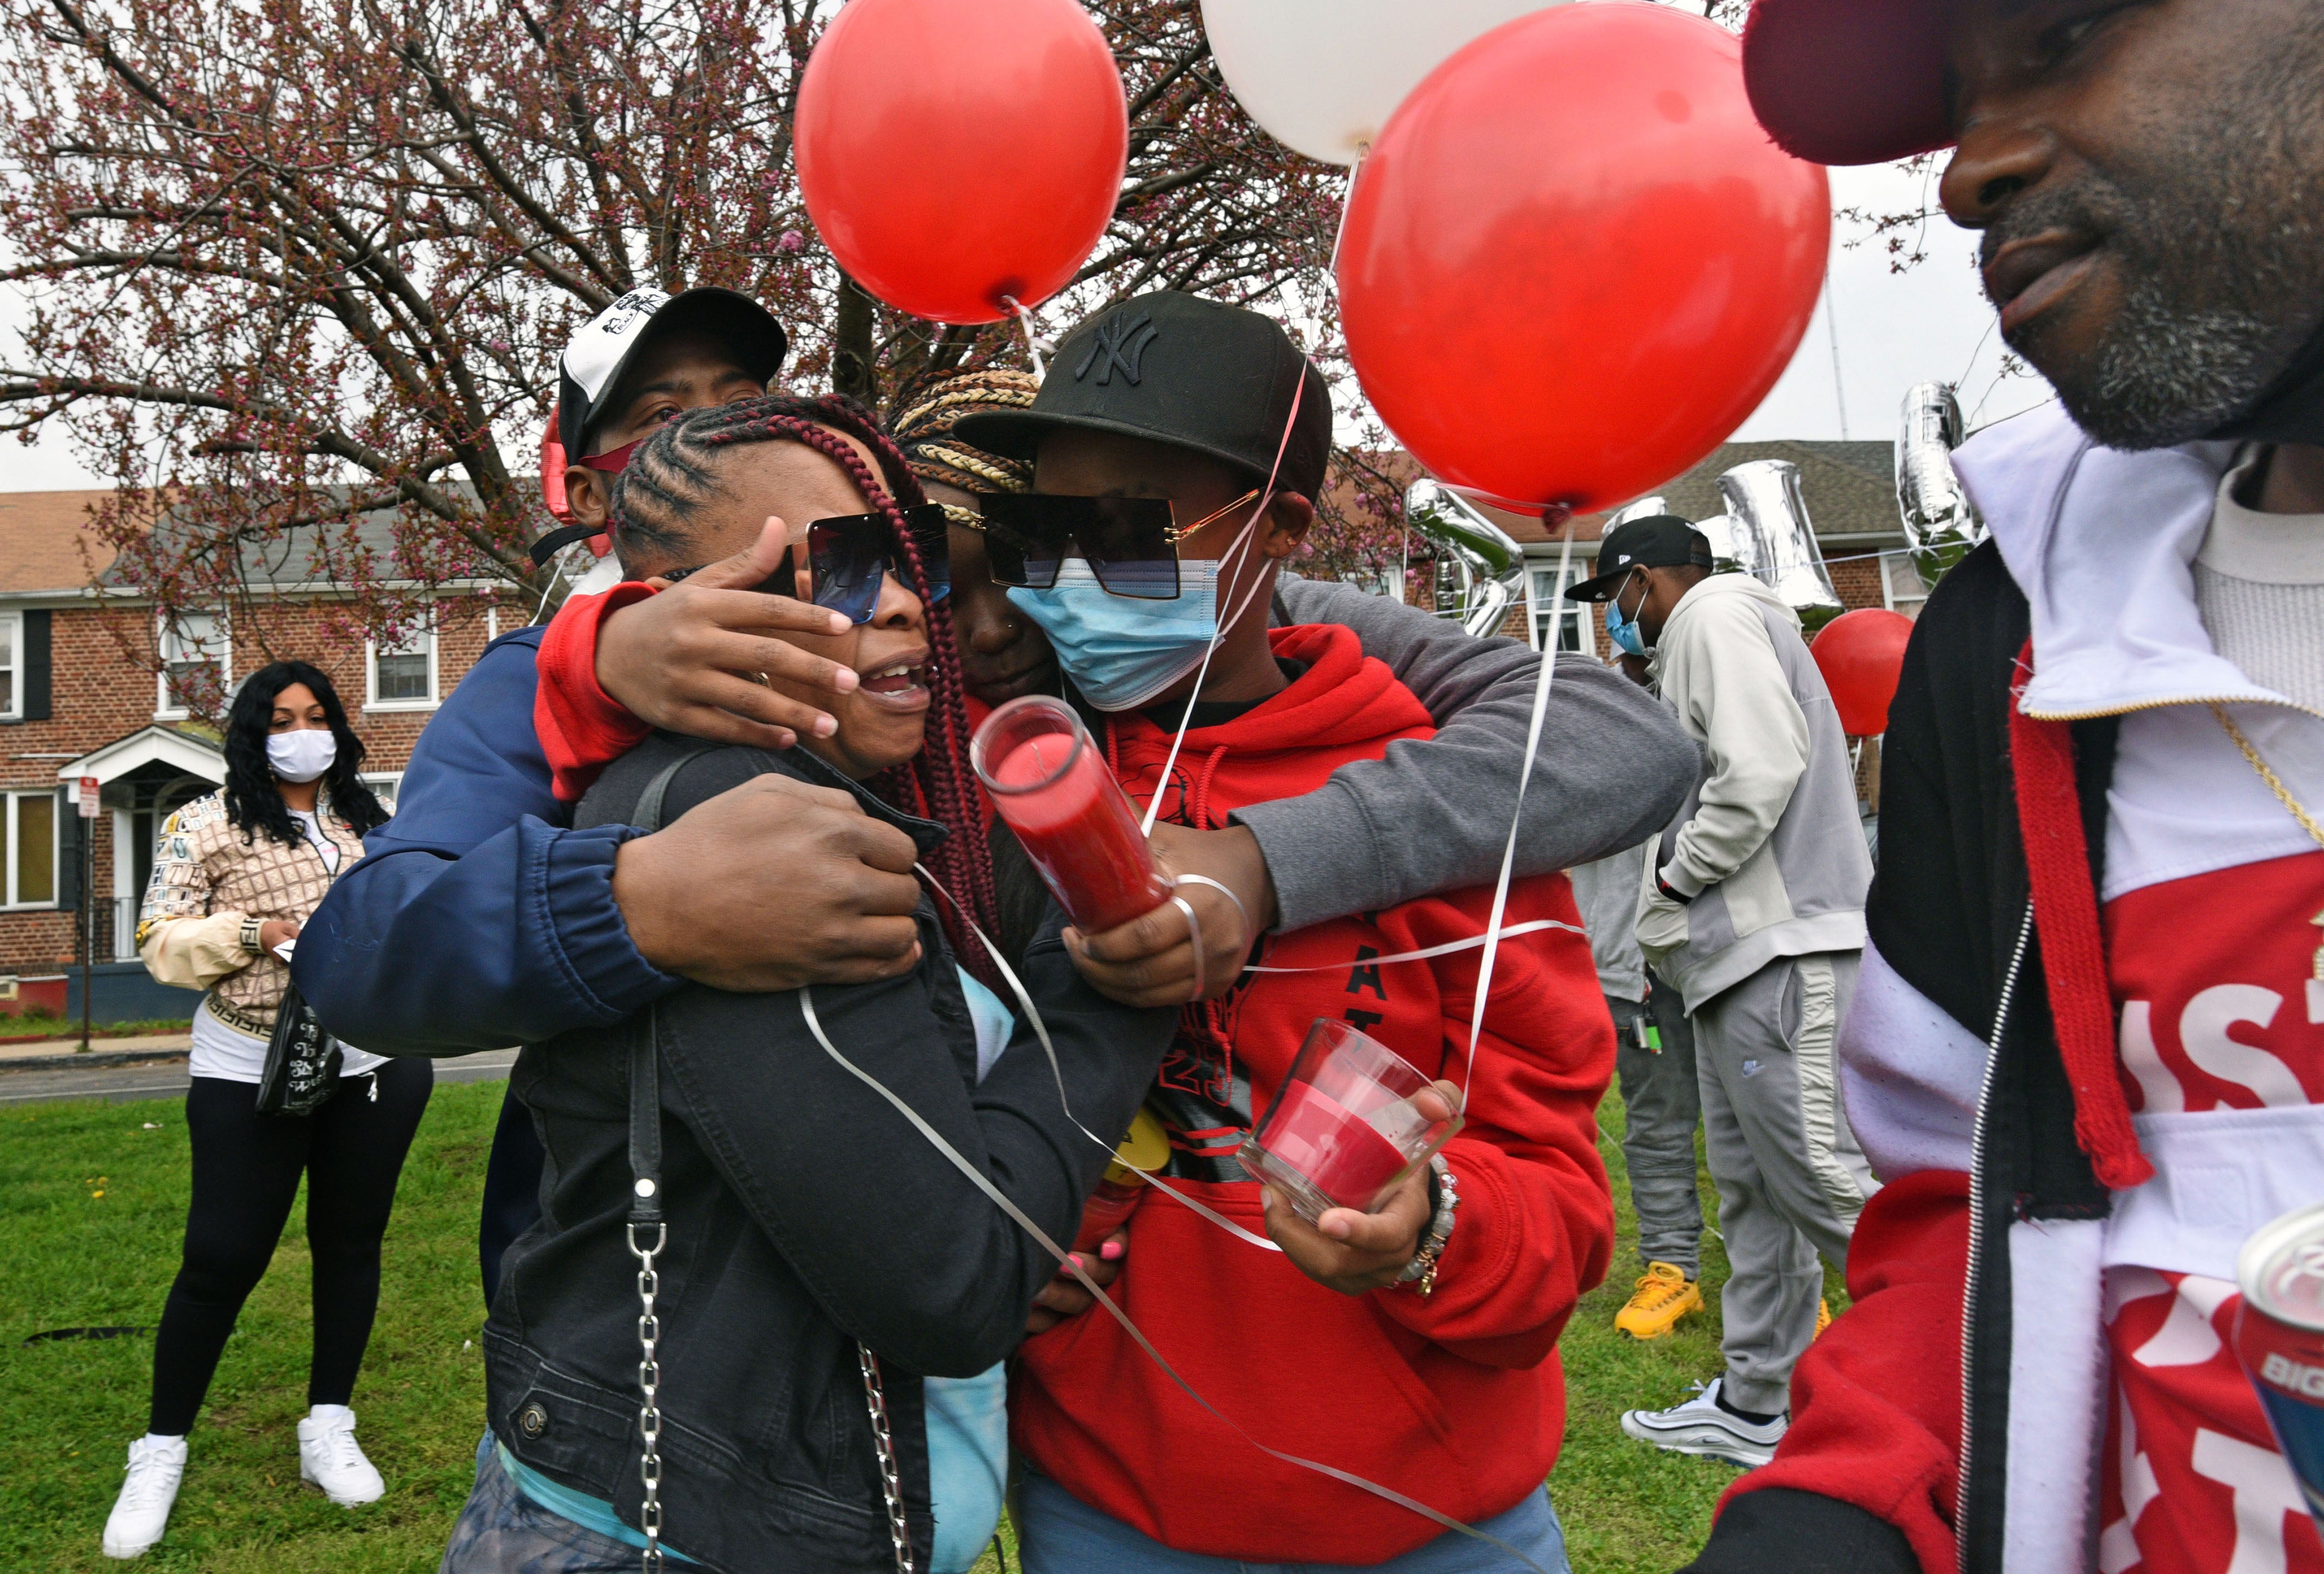 Tomeka Holmes (left) is embraced by family members, including her 15-year-old daughter Siani Custis